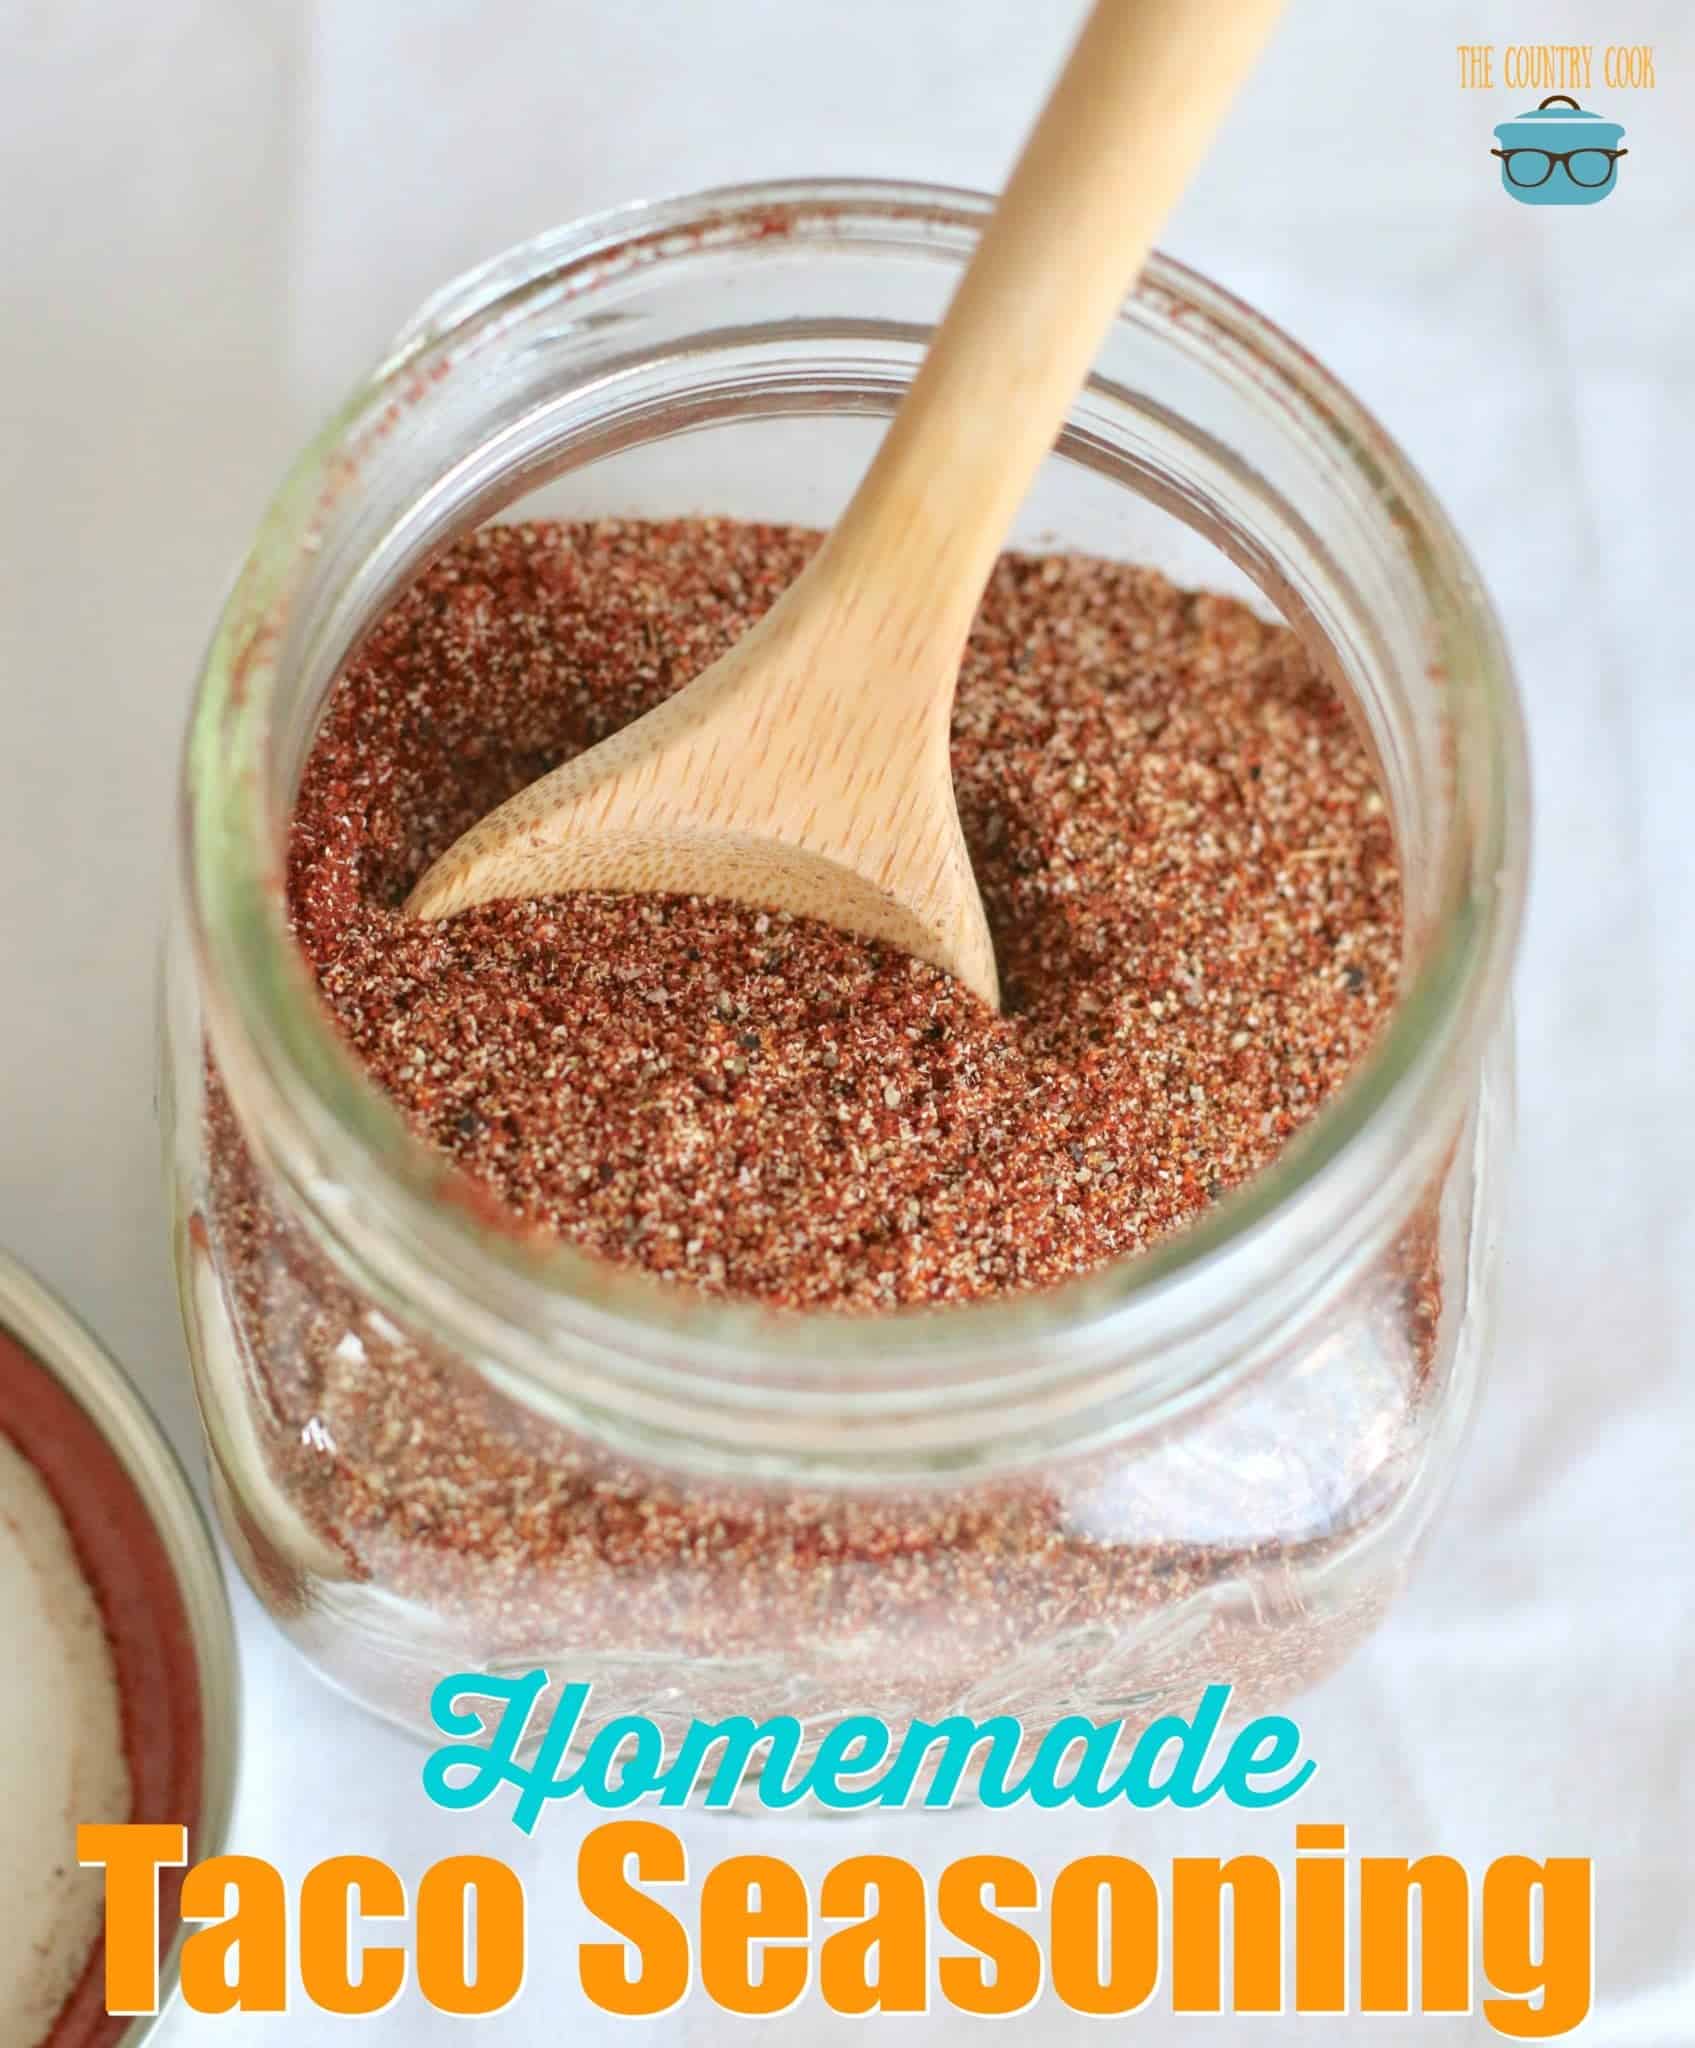 Homemade Taco Seasoning recipe from The Country Cook.